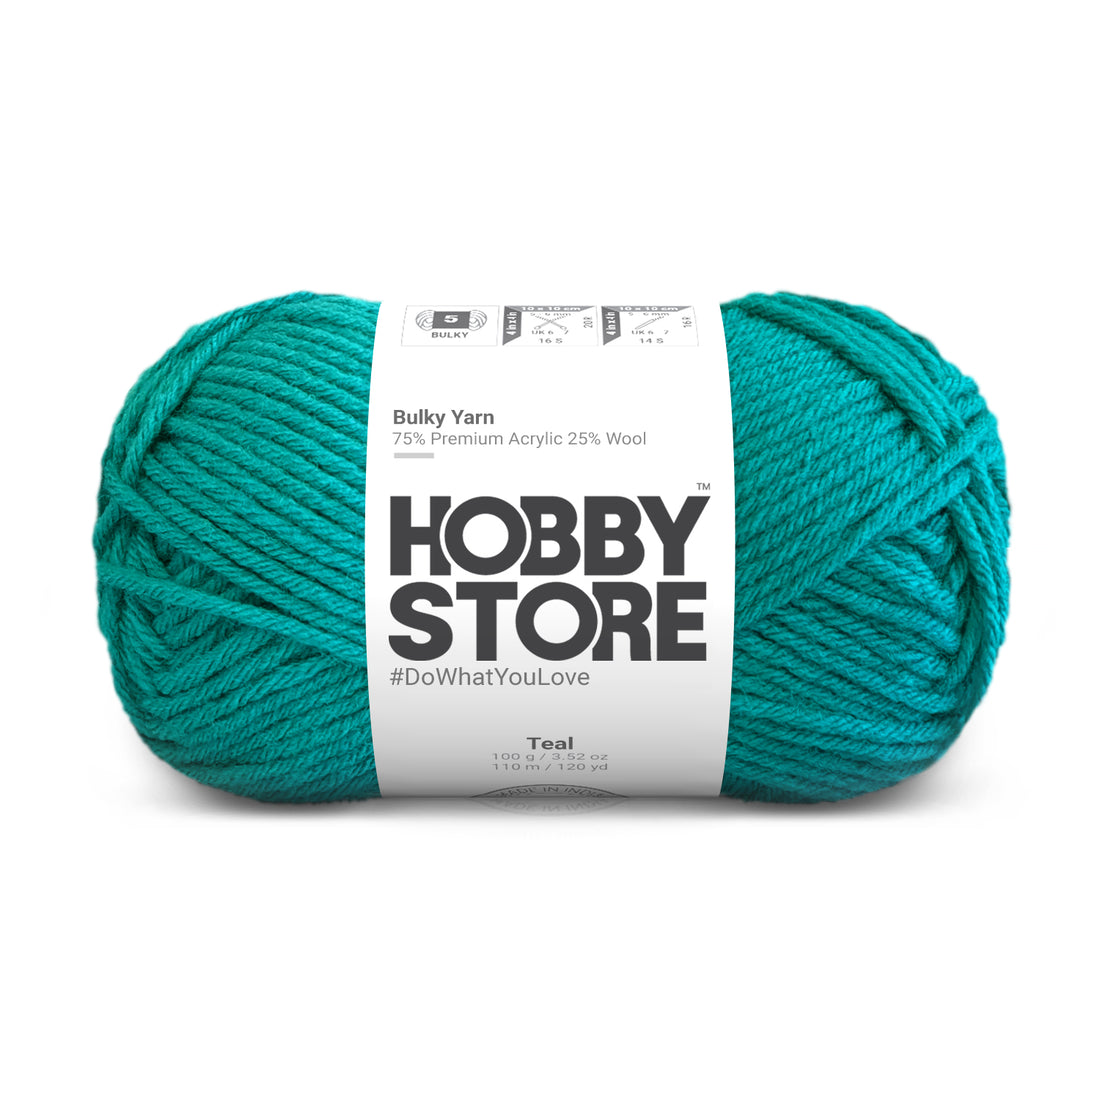 Bulky Yarn by Hobby Store - Teal 6034